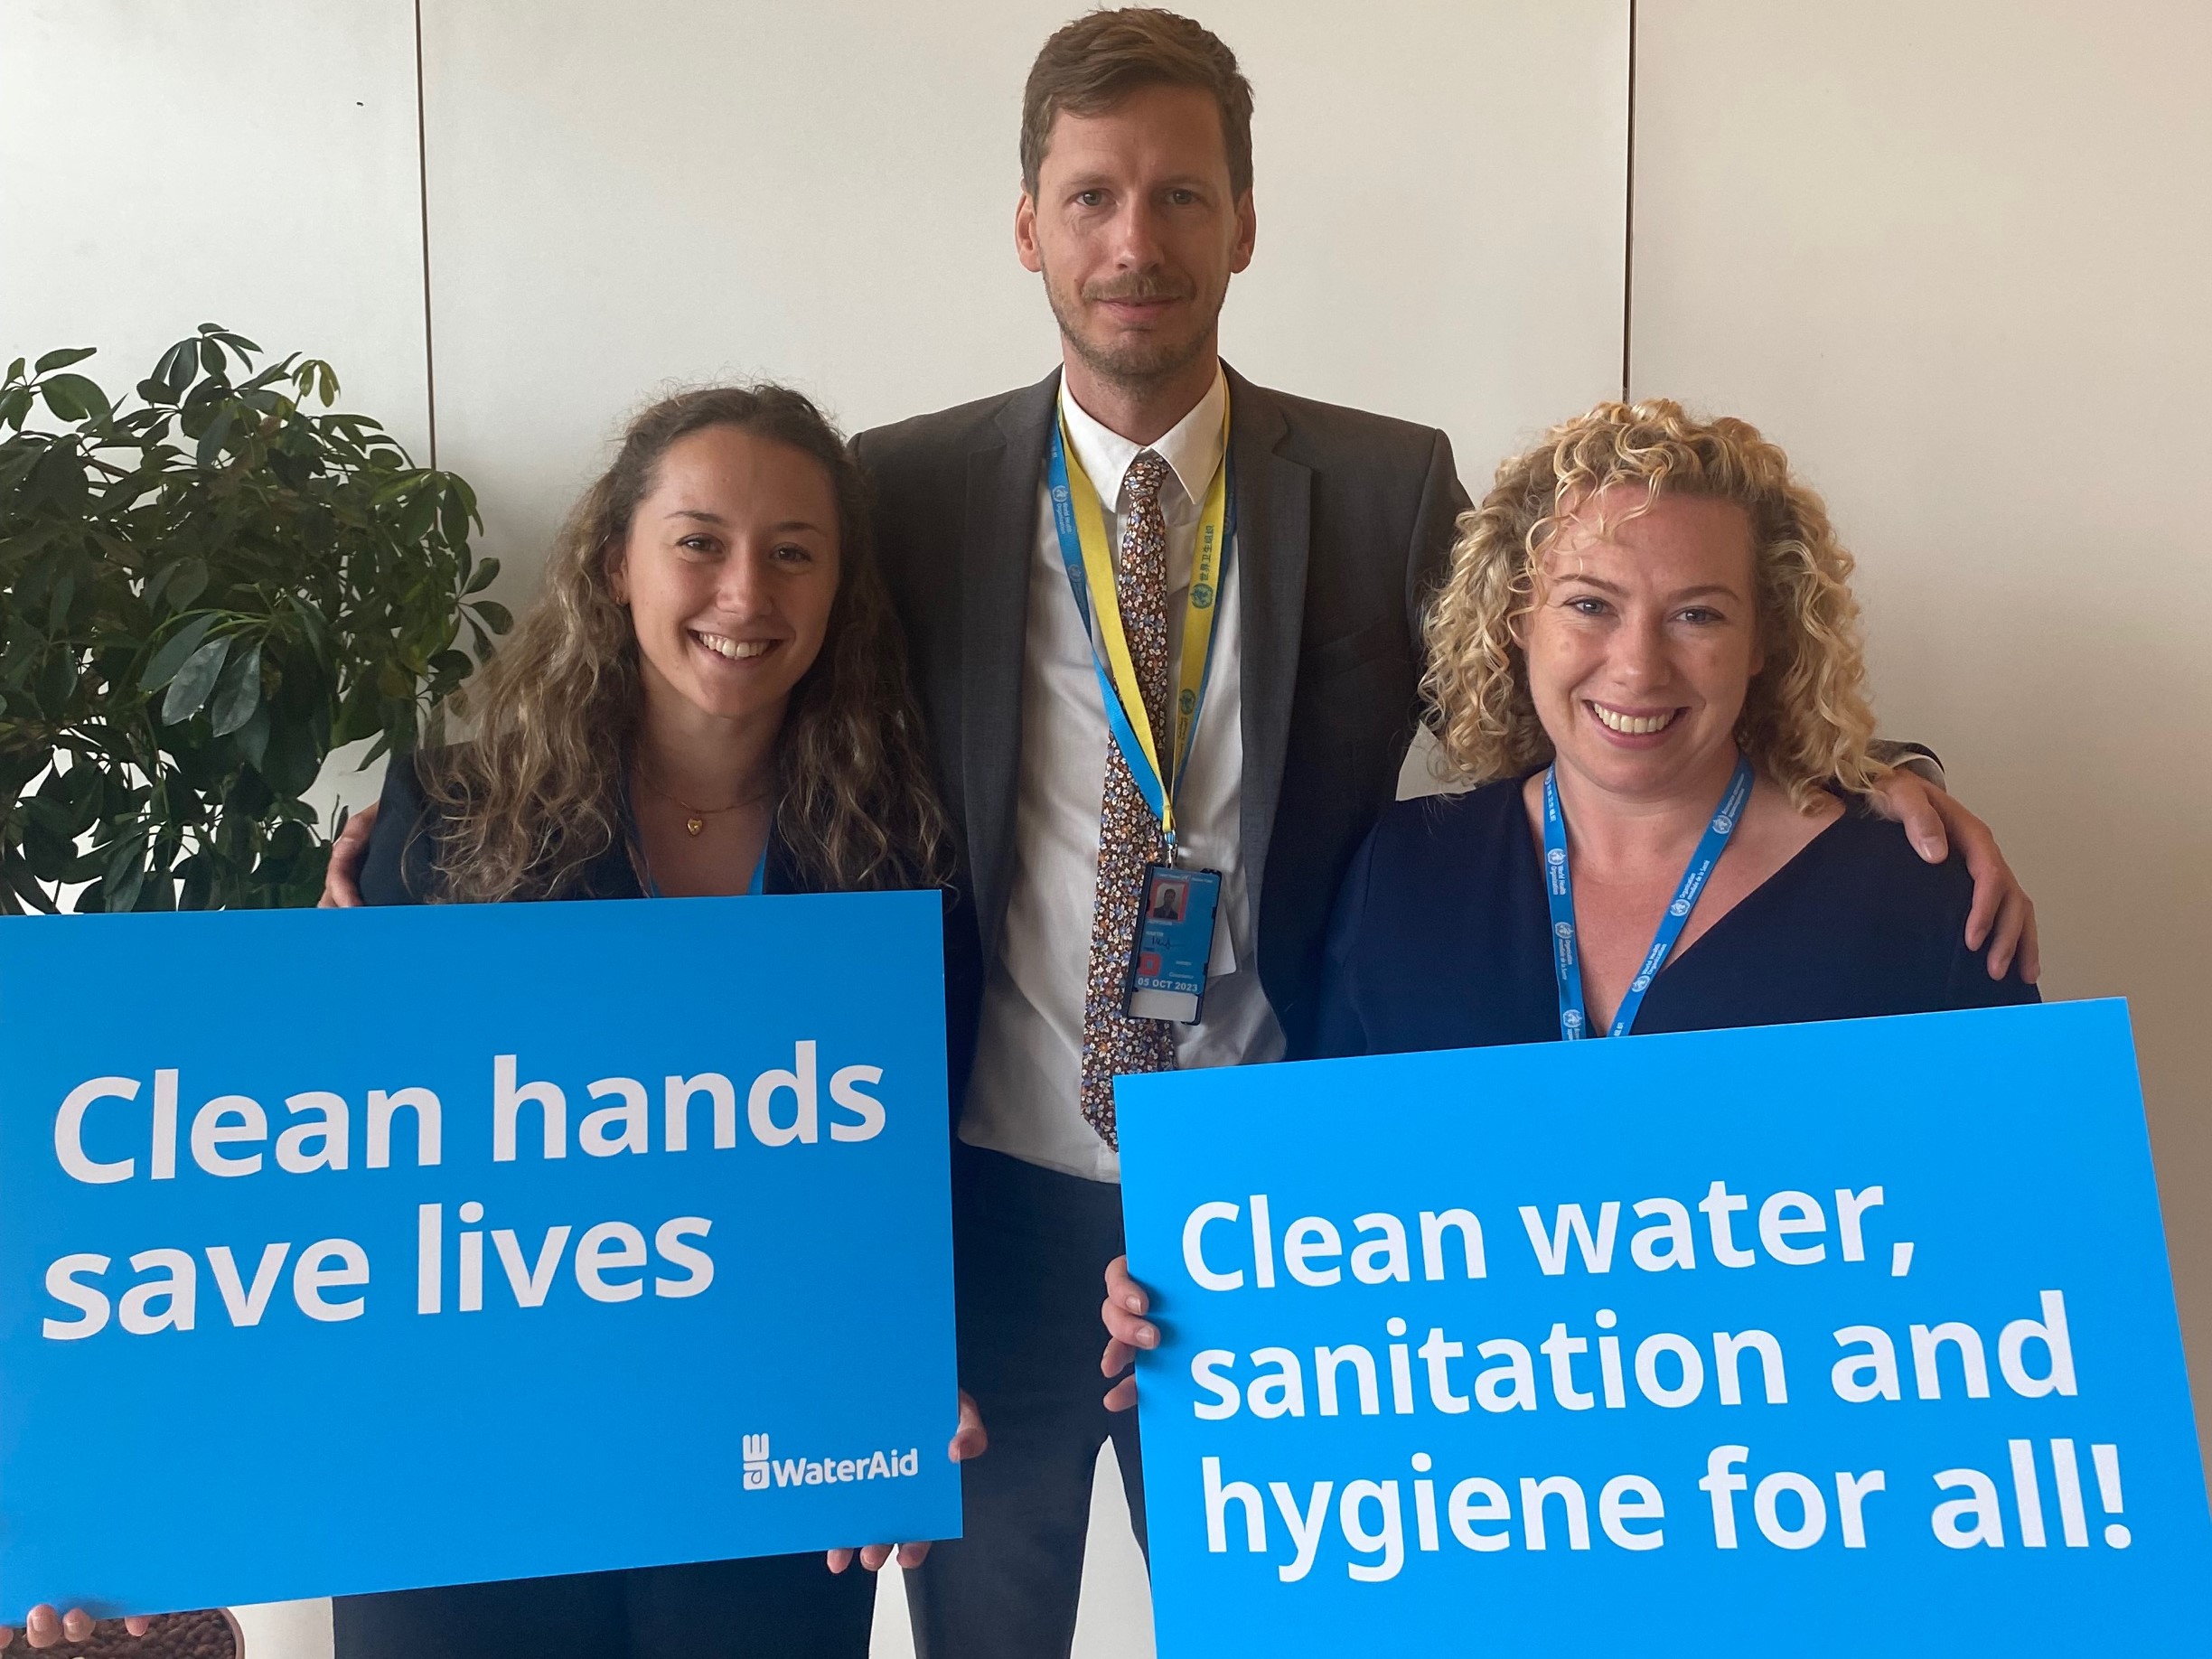 Members of Sweden's delegation to the World Health Assembly and WaterAid's Helen Hamilton hold placards saying 'clean hands save lives' and 'clean water and sanitation for all!'at the 75th World Health Assembly 2022.